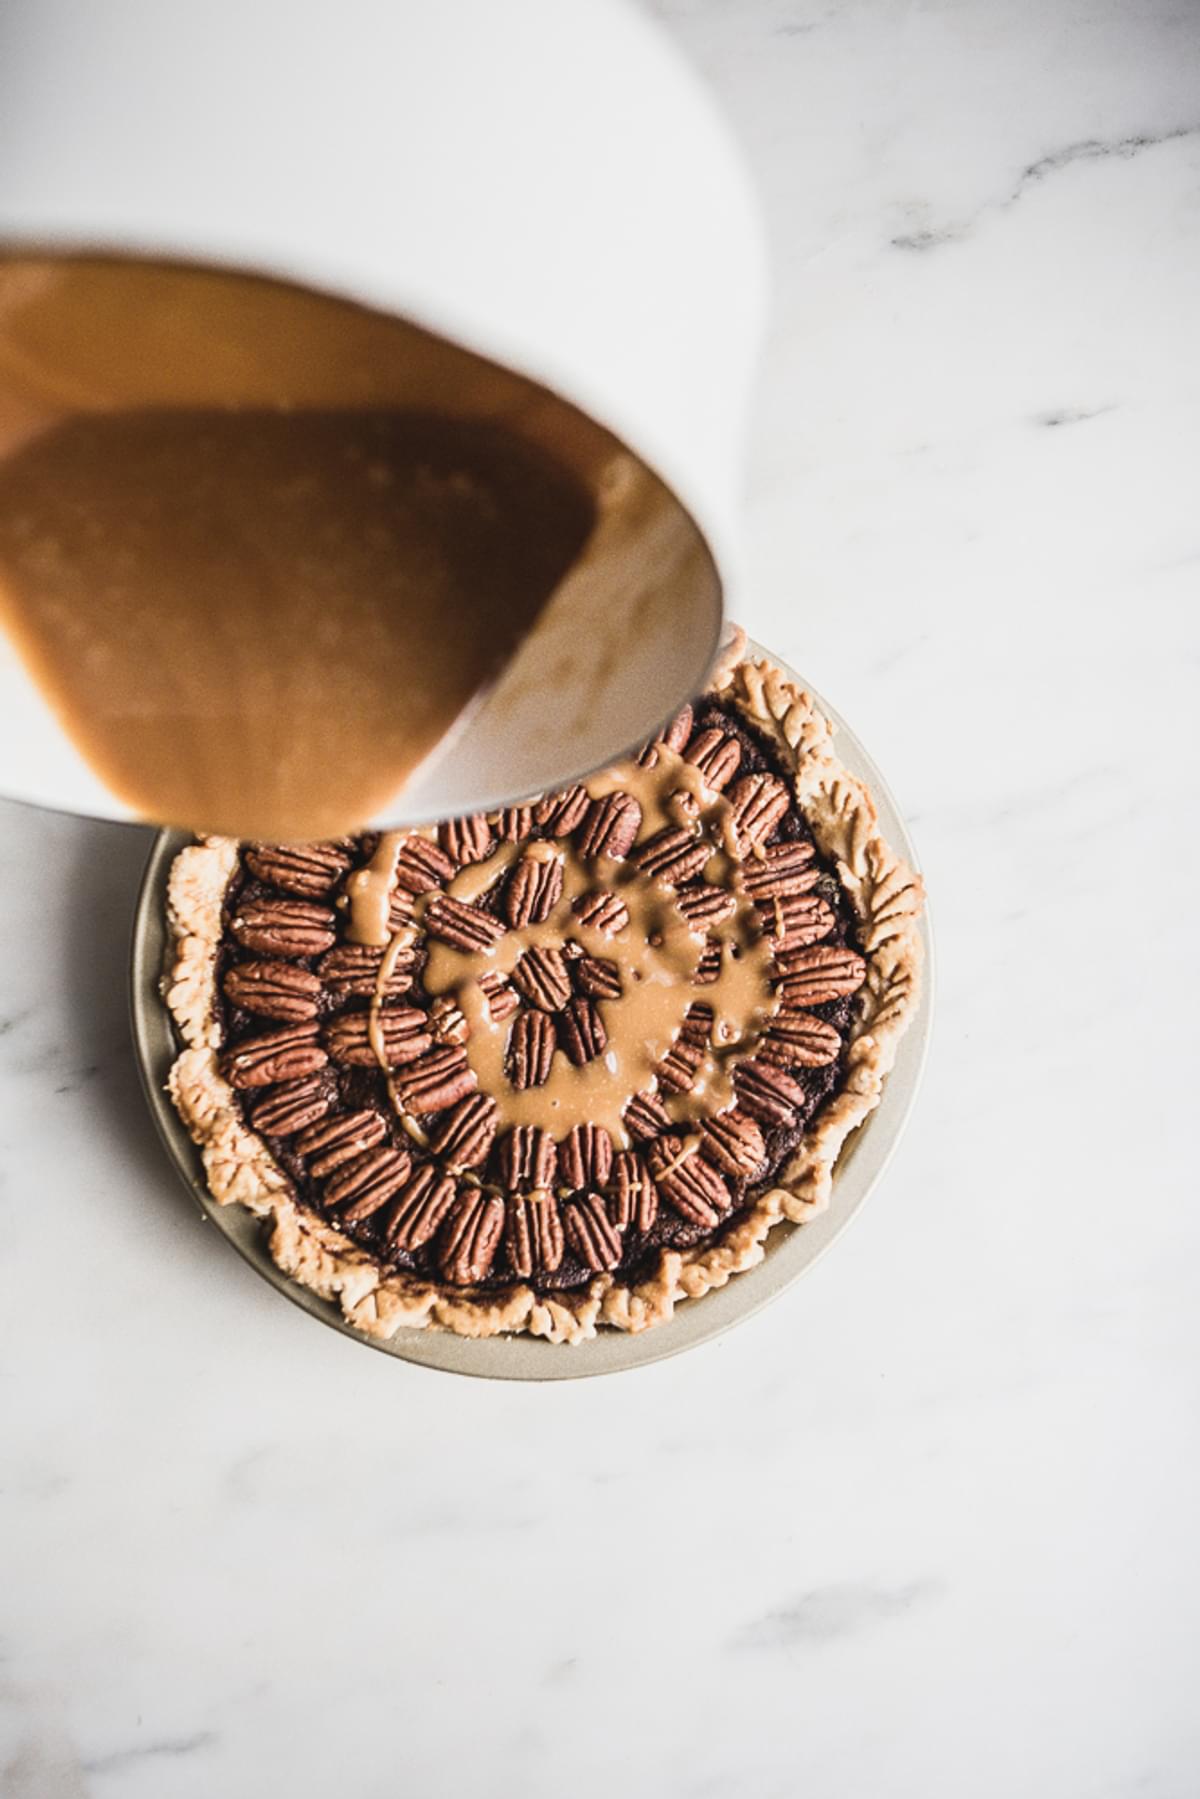 caramel being poured over a pecan pie